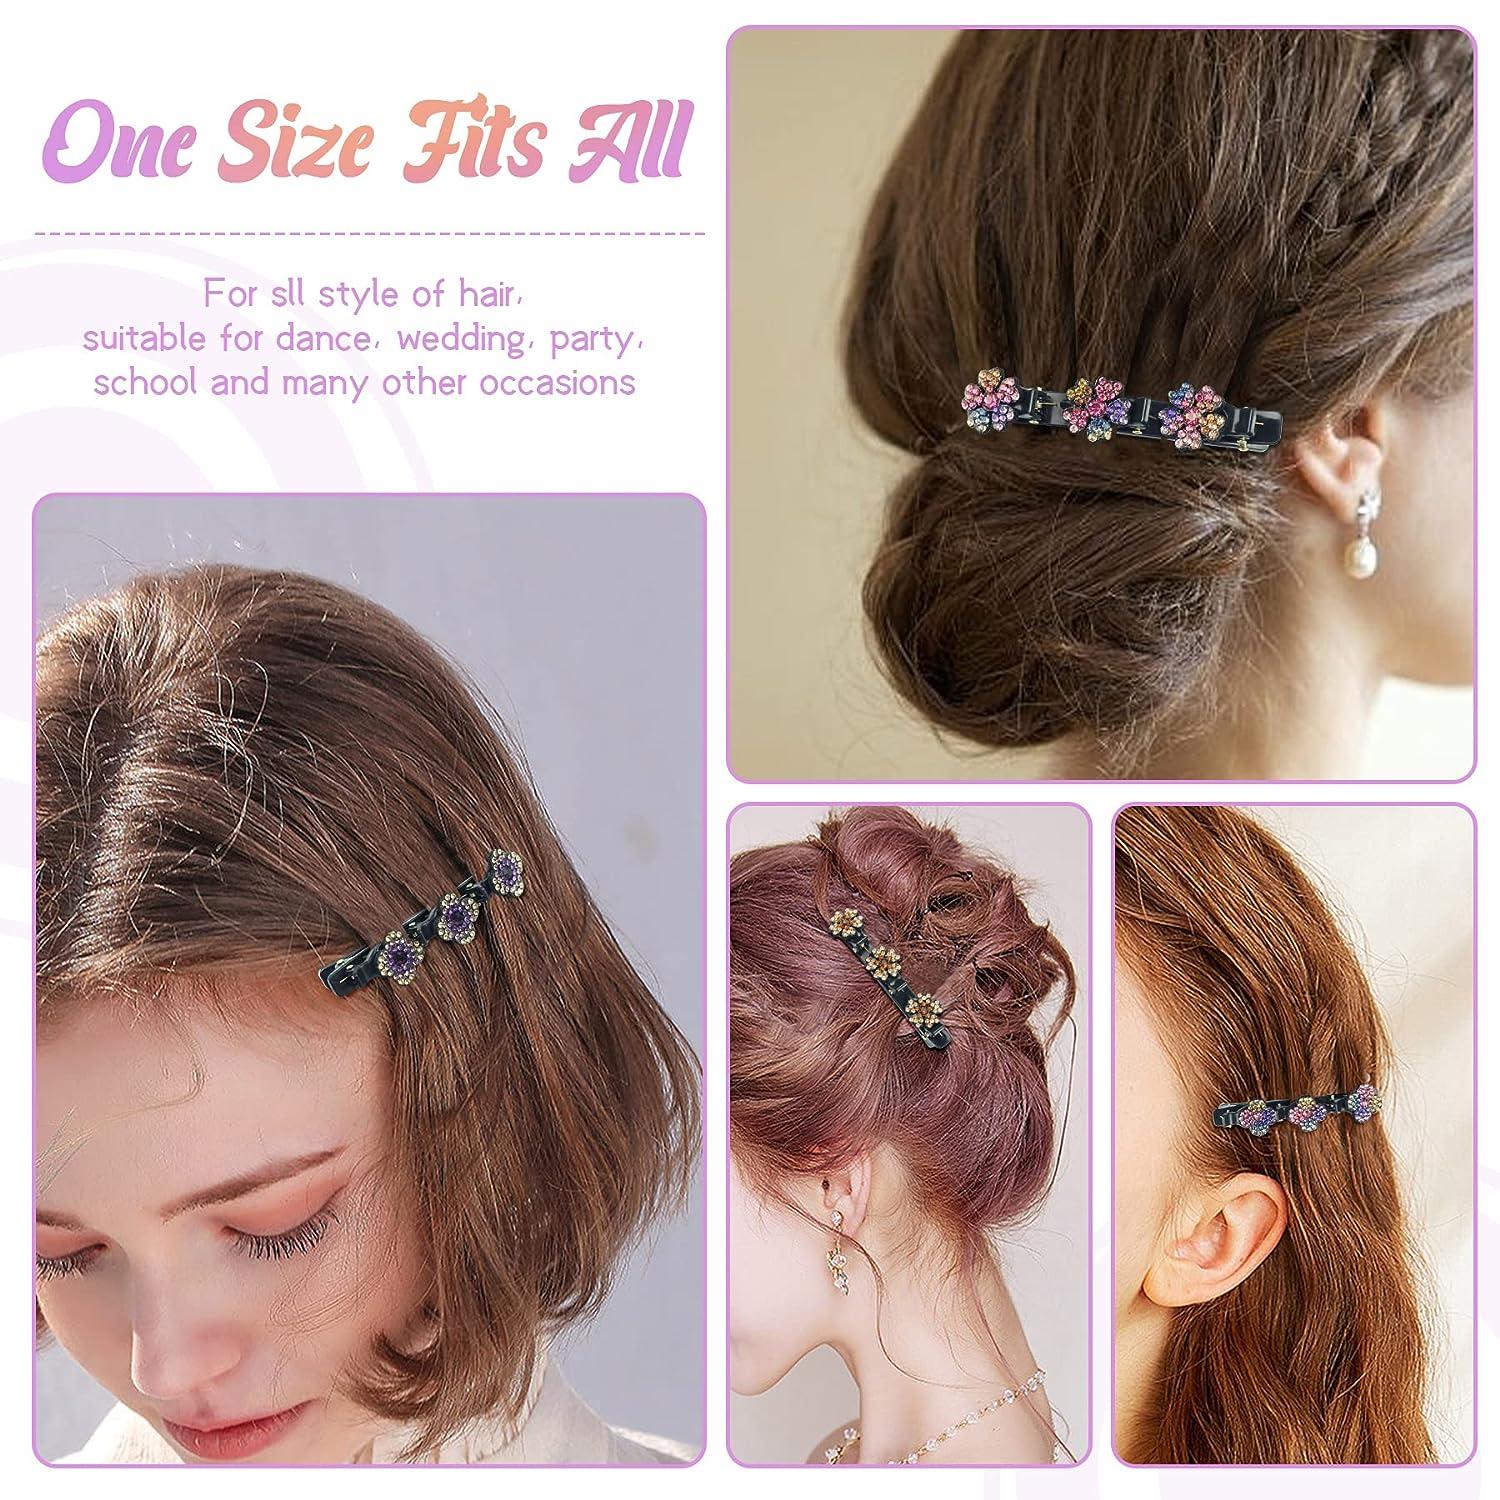 Braided Hair Clip with 3 Small Clips, Sparkling Crystal Stone Braided Hair  Clips for Women or Girl,Multi Clip Hair Barrette, Triple Hair Clips with  Rhinestones for Sectioning (Double Flower-4 PCS) 